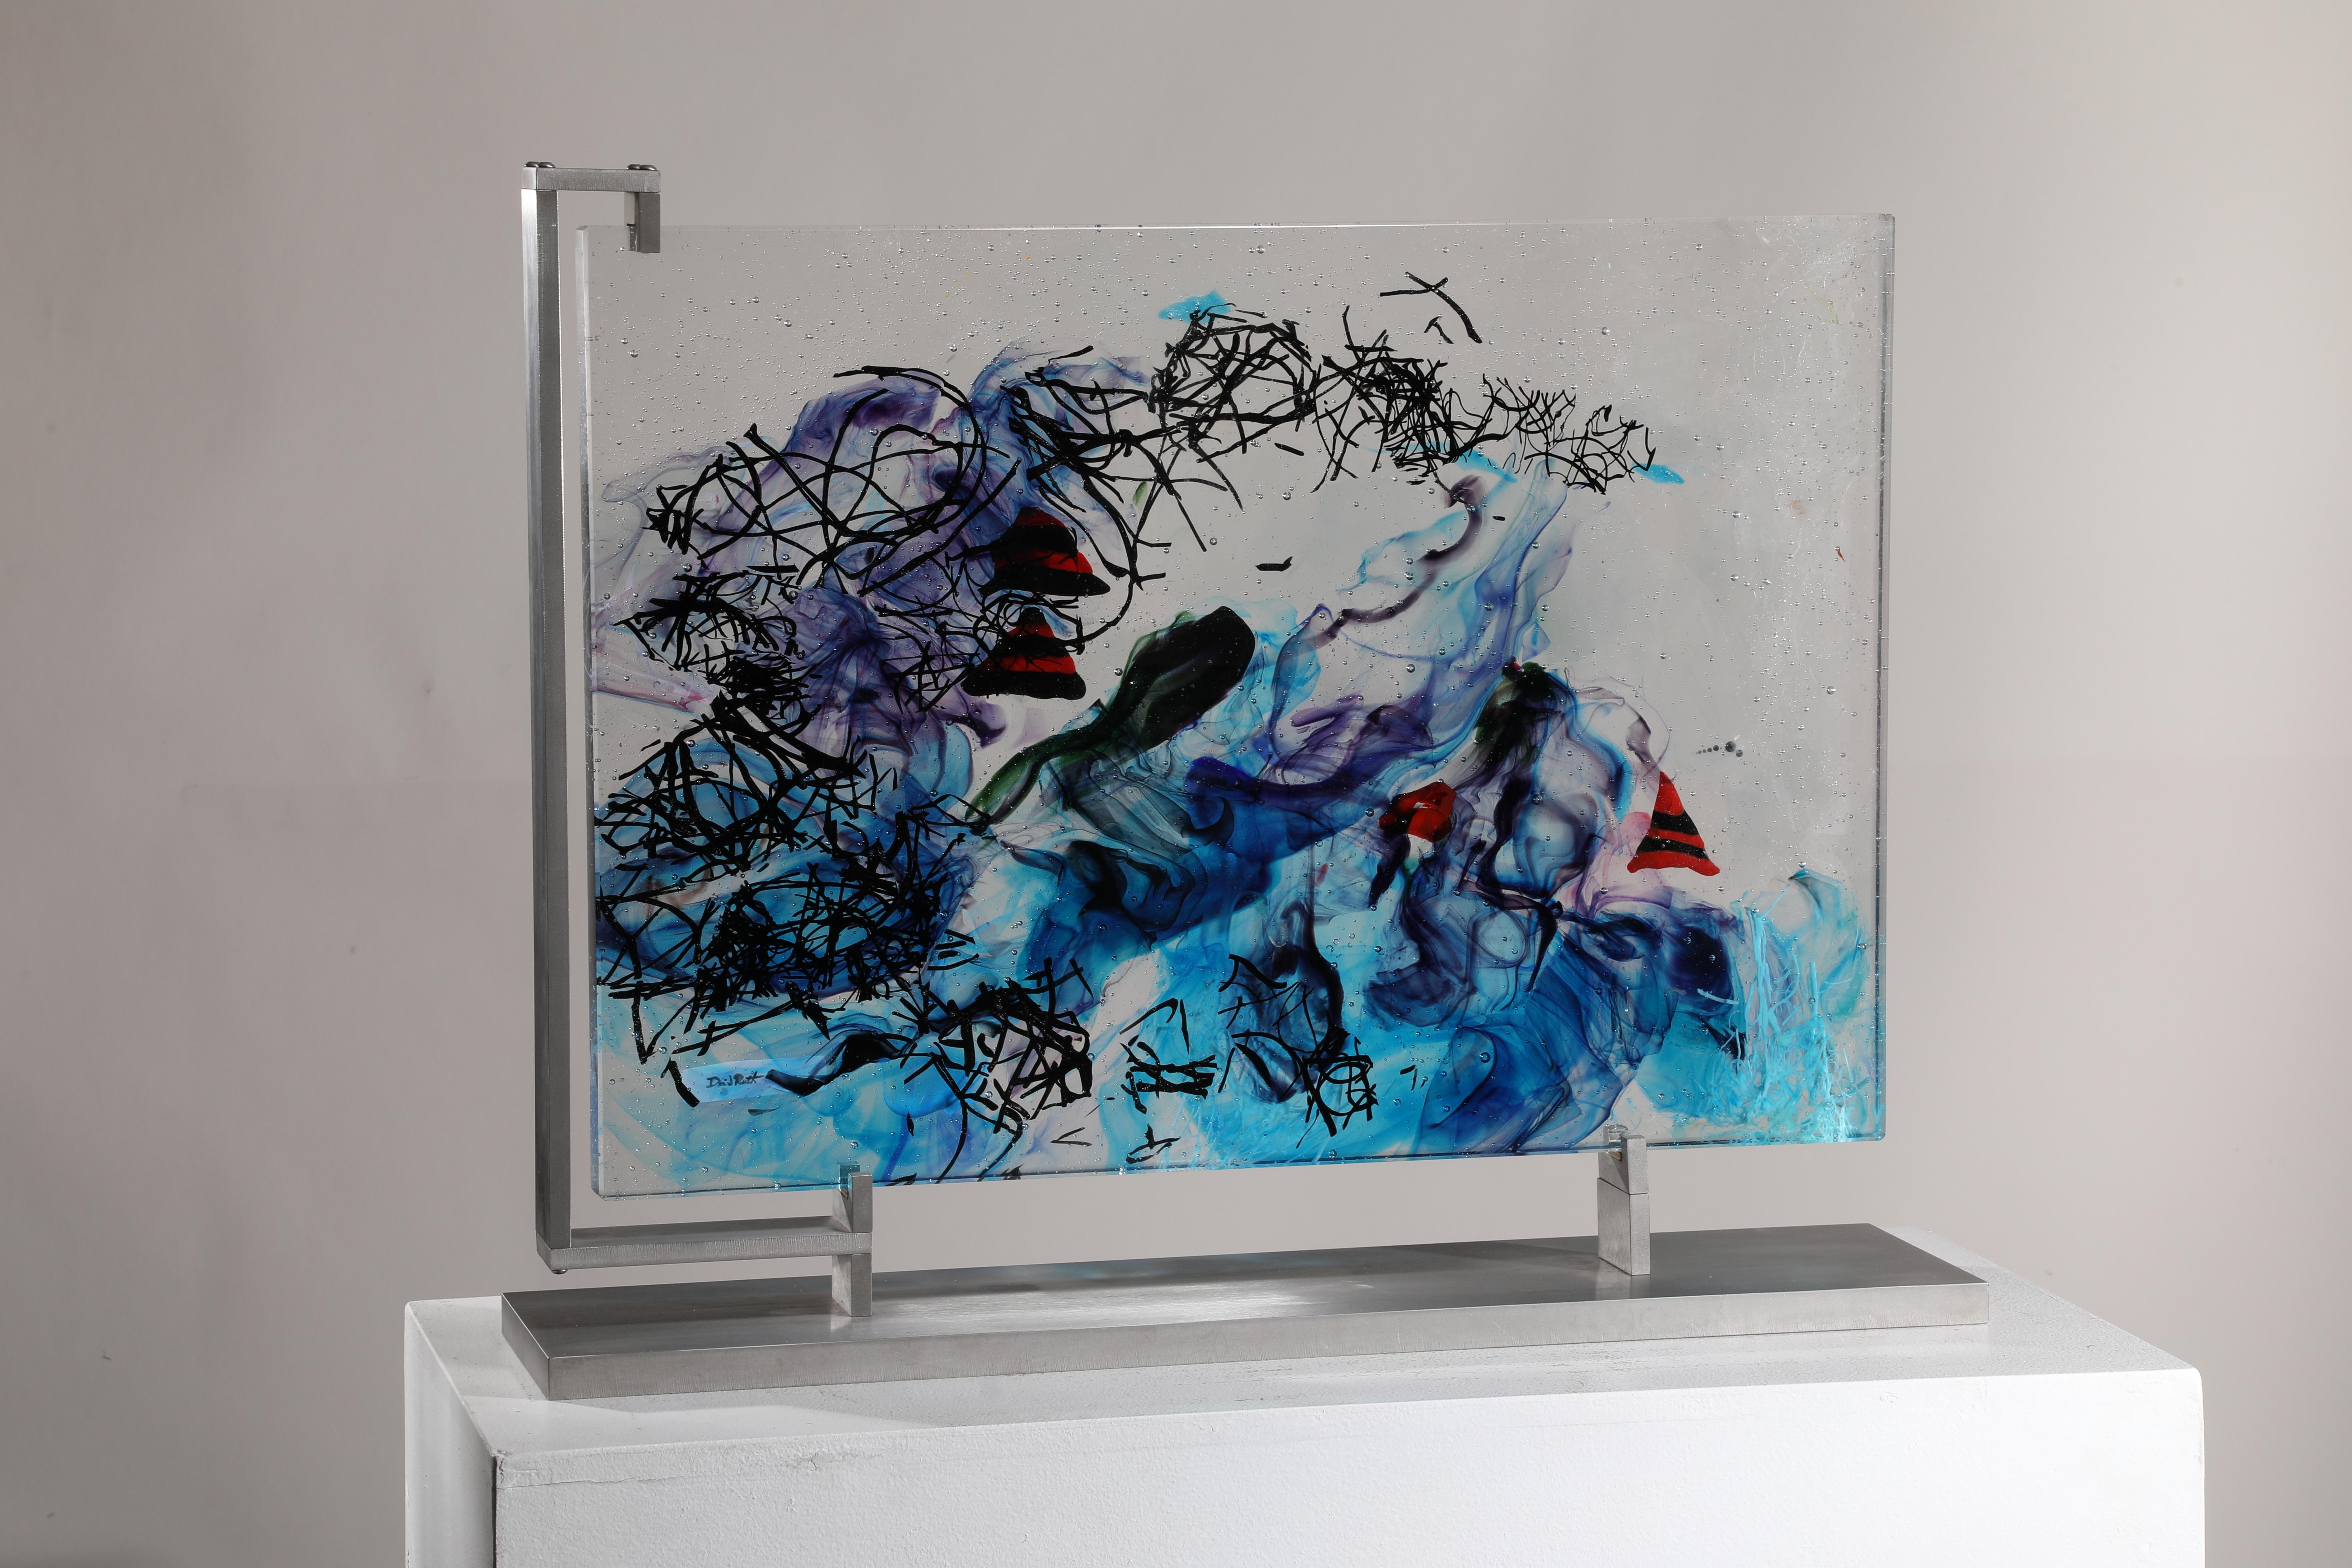 Abstract Cast Glass Sculpture, 'Tikei', 2013 by David Ruth